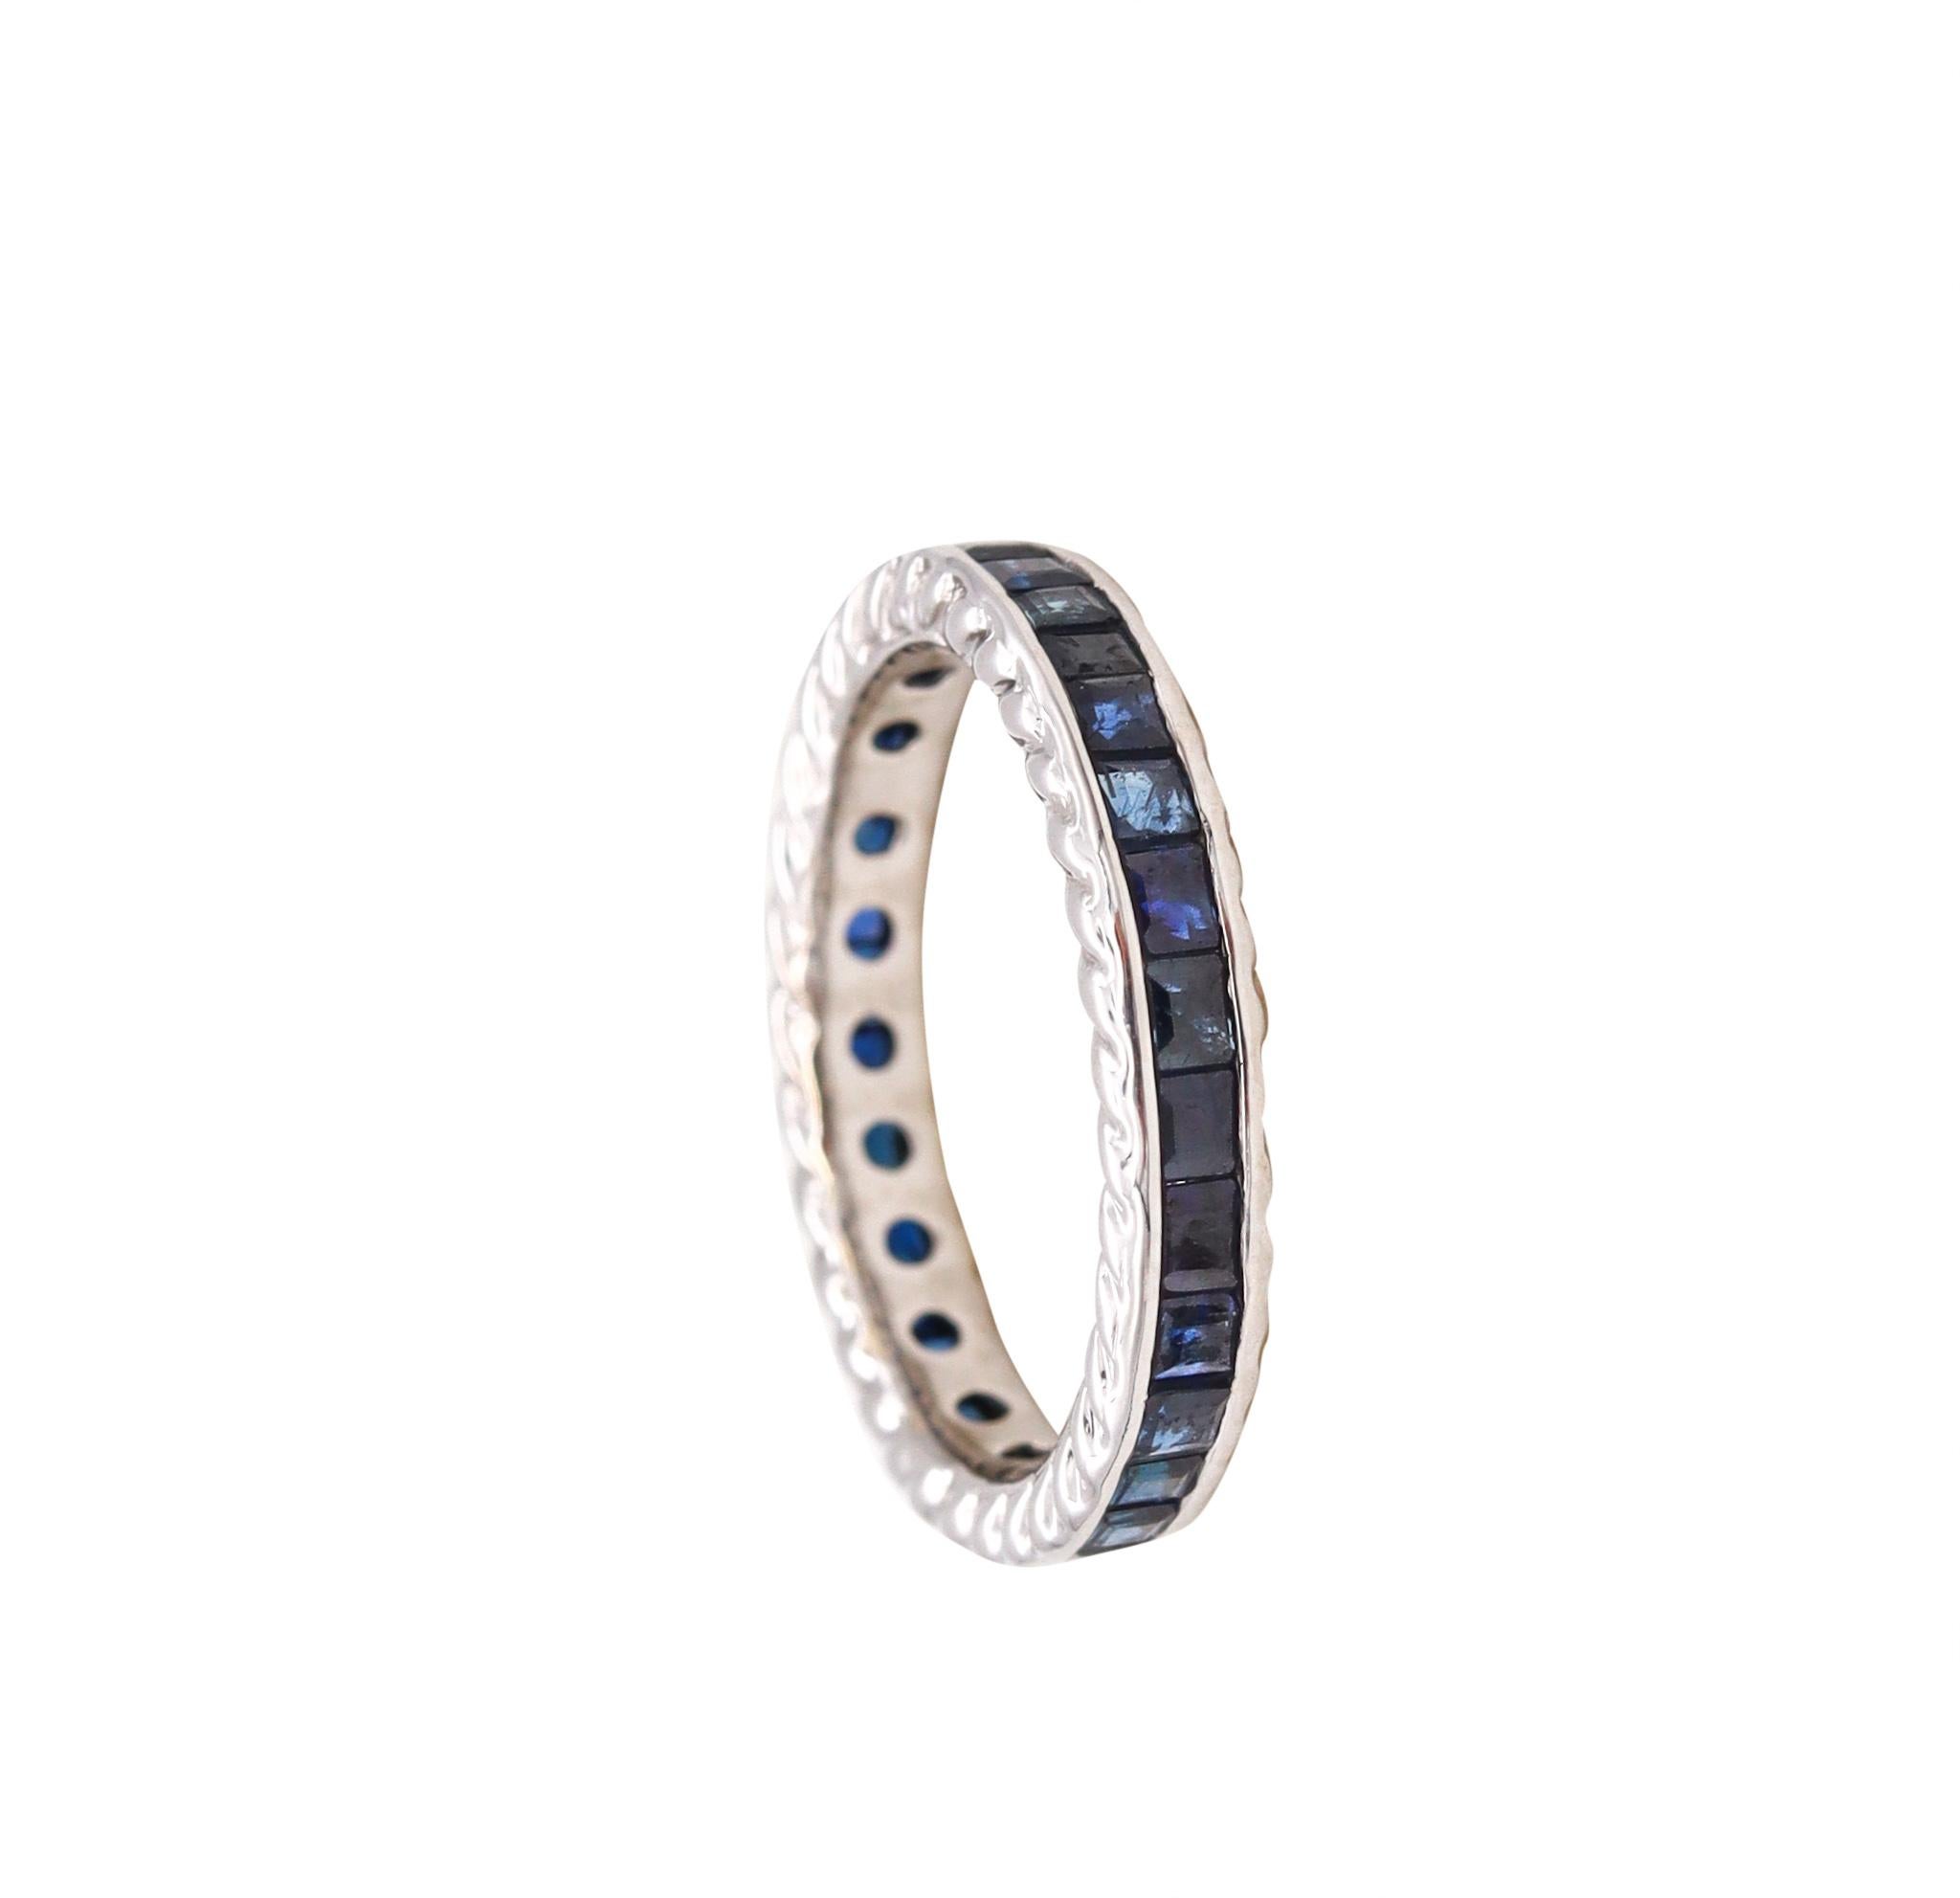 Eternity ring with Natural blue Sapphires.

A modern full band carefully crafted in solid white gold of 18 karats, with high polished finish and the sides decorated, with fluted patterns. It is mounted in a channel setting, with 32 calibrated